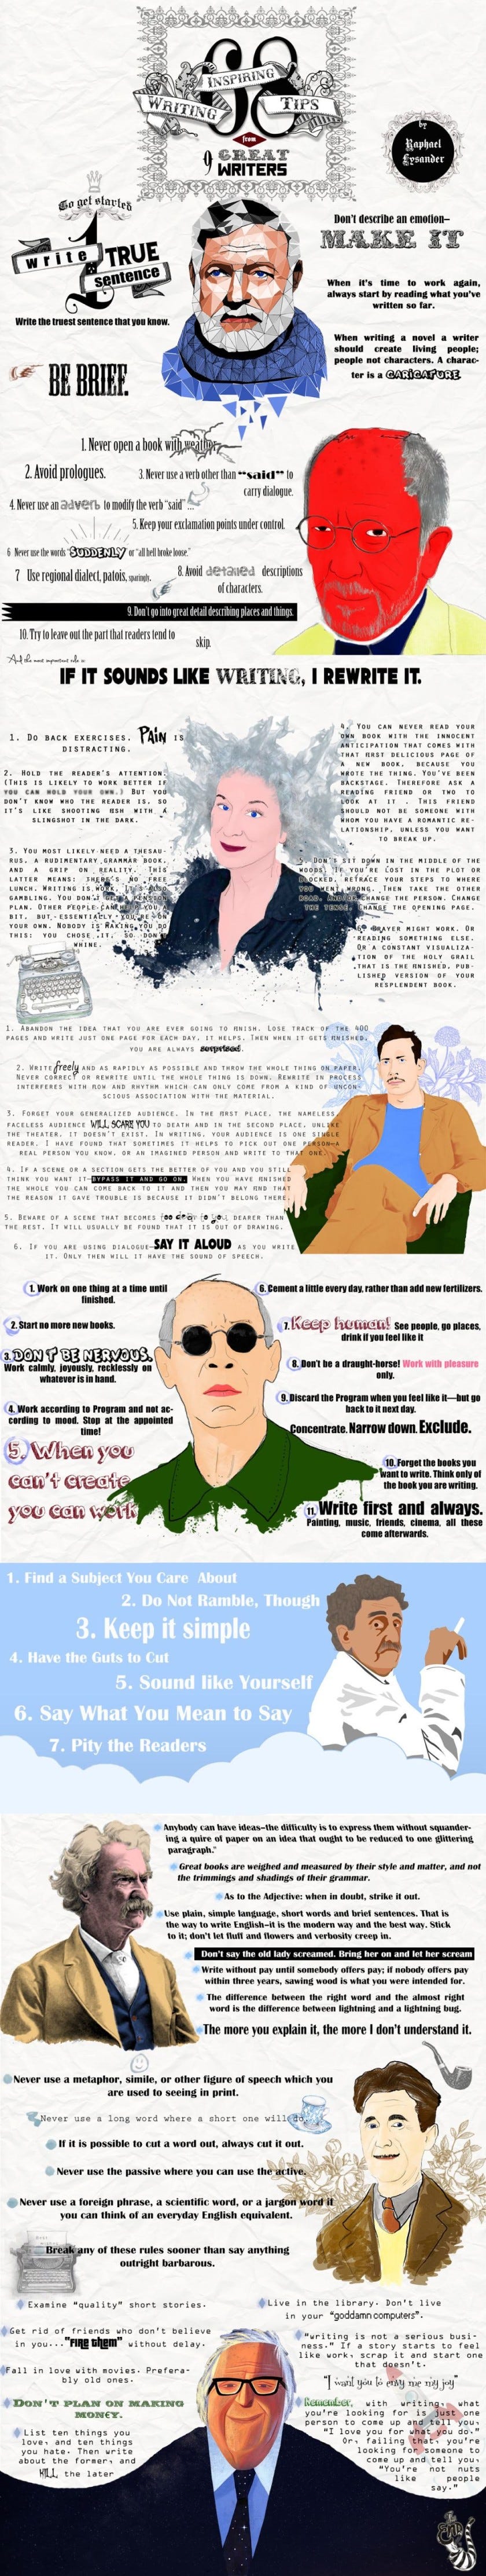 Infographic writing tips from famous writers